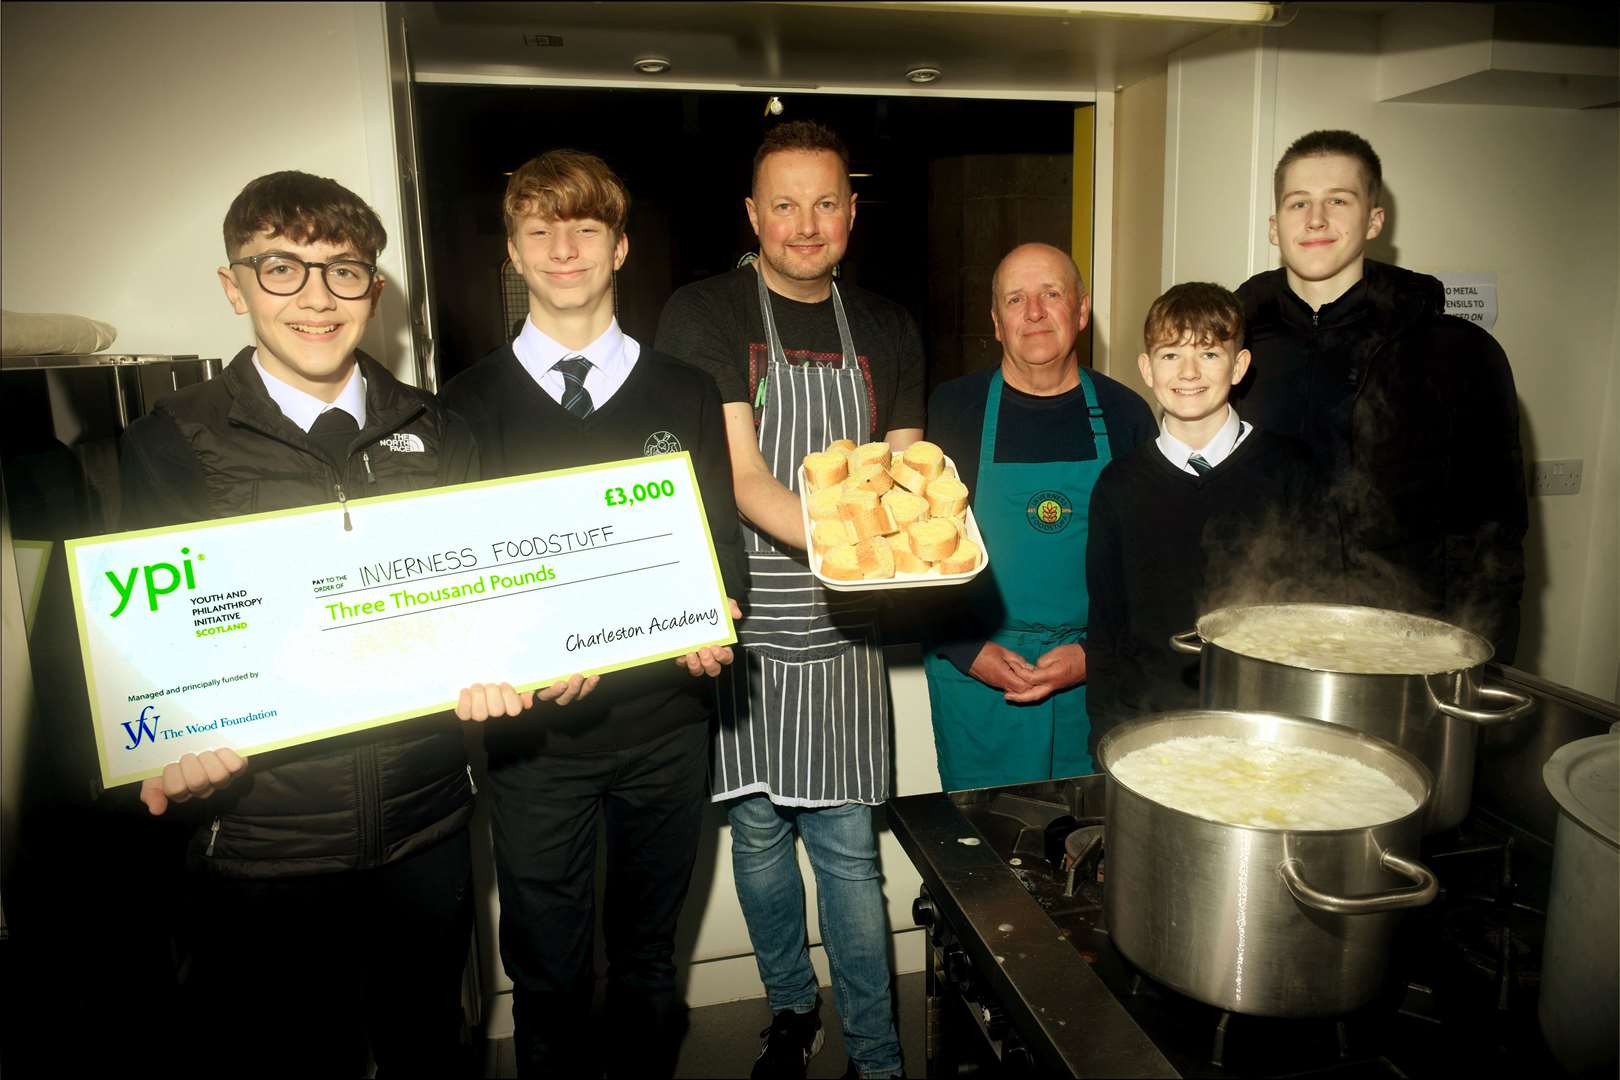 Charleston Academy pupils Owen Macleod, Sam Meier, Danny Brindle and Bastion Burkhard with catering and training supervisor Al Edwards and volunteer and trustee Dave Kemp. Picture: James Mackenzie.